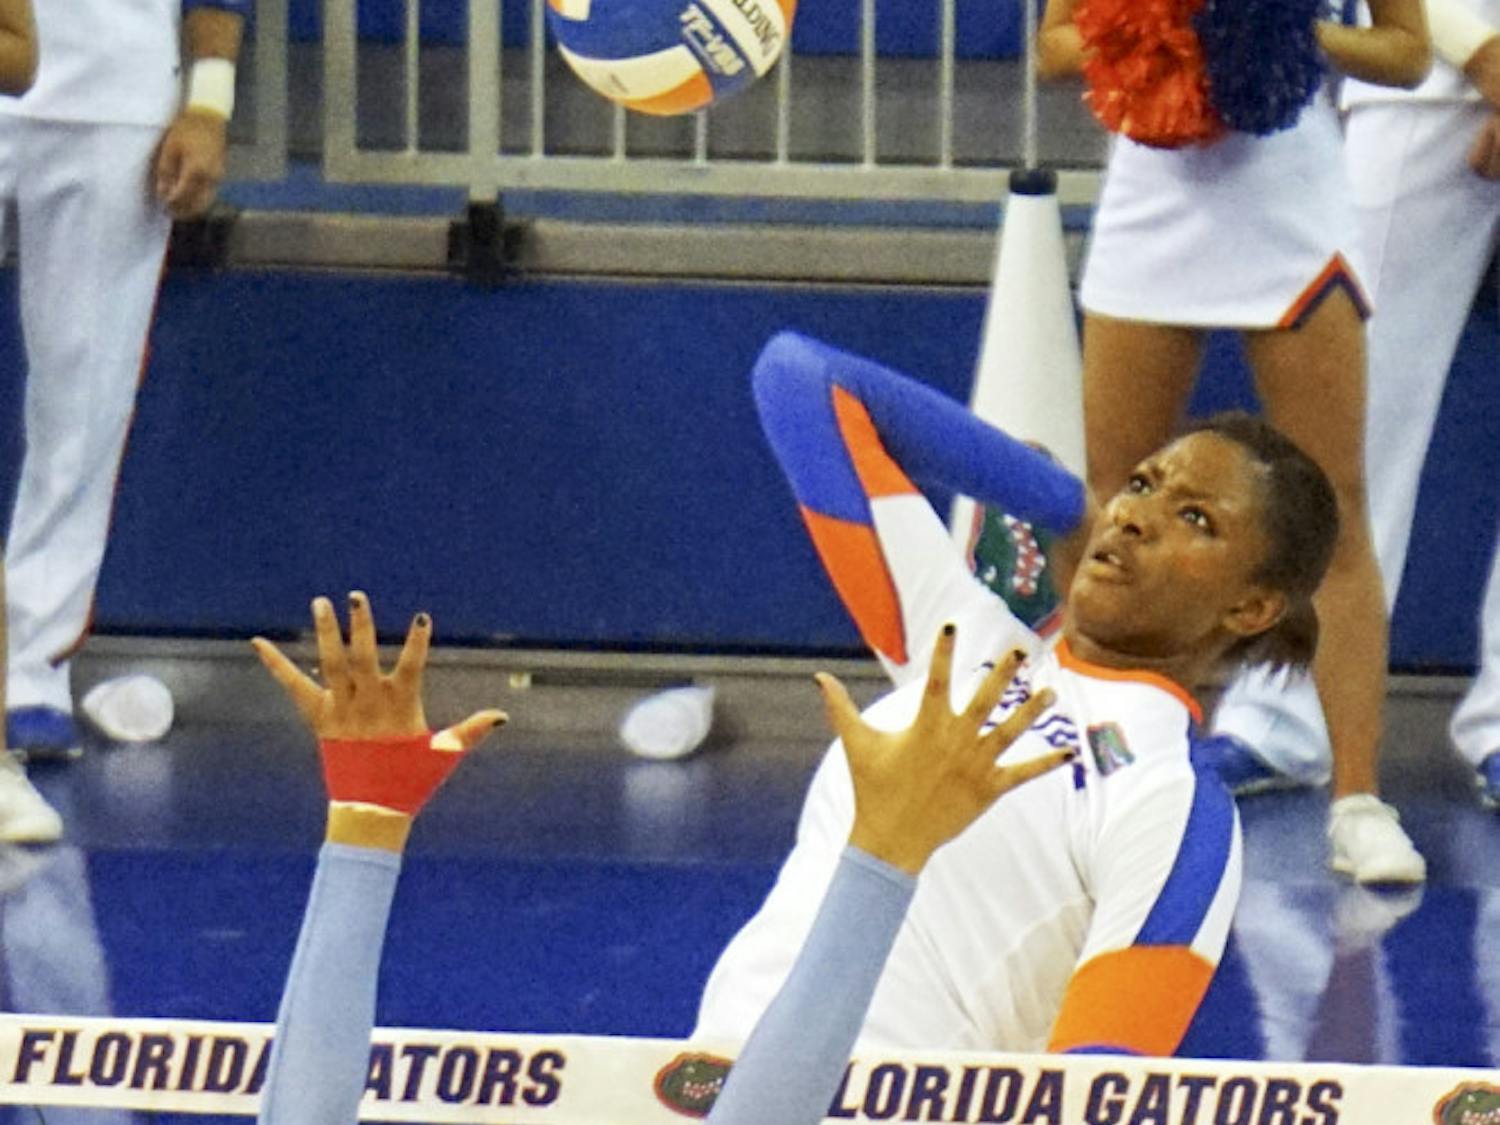 UF middle blocker Rhamat Alhassan swings for a kill during Florida's 3-0 win against Ole Miss on Sept. 25 in the O'Connell Center.